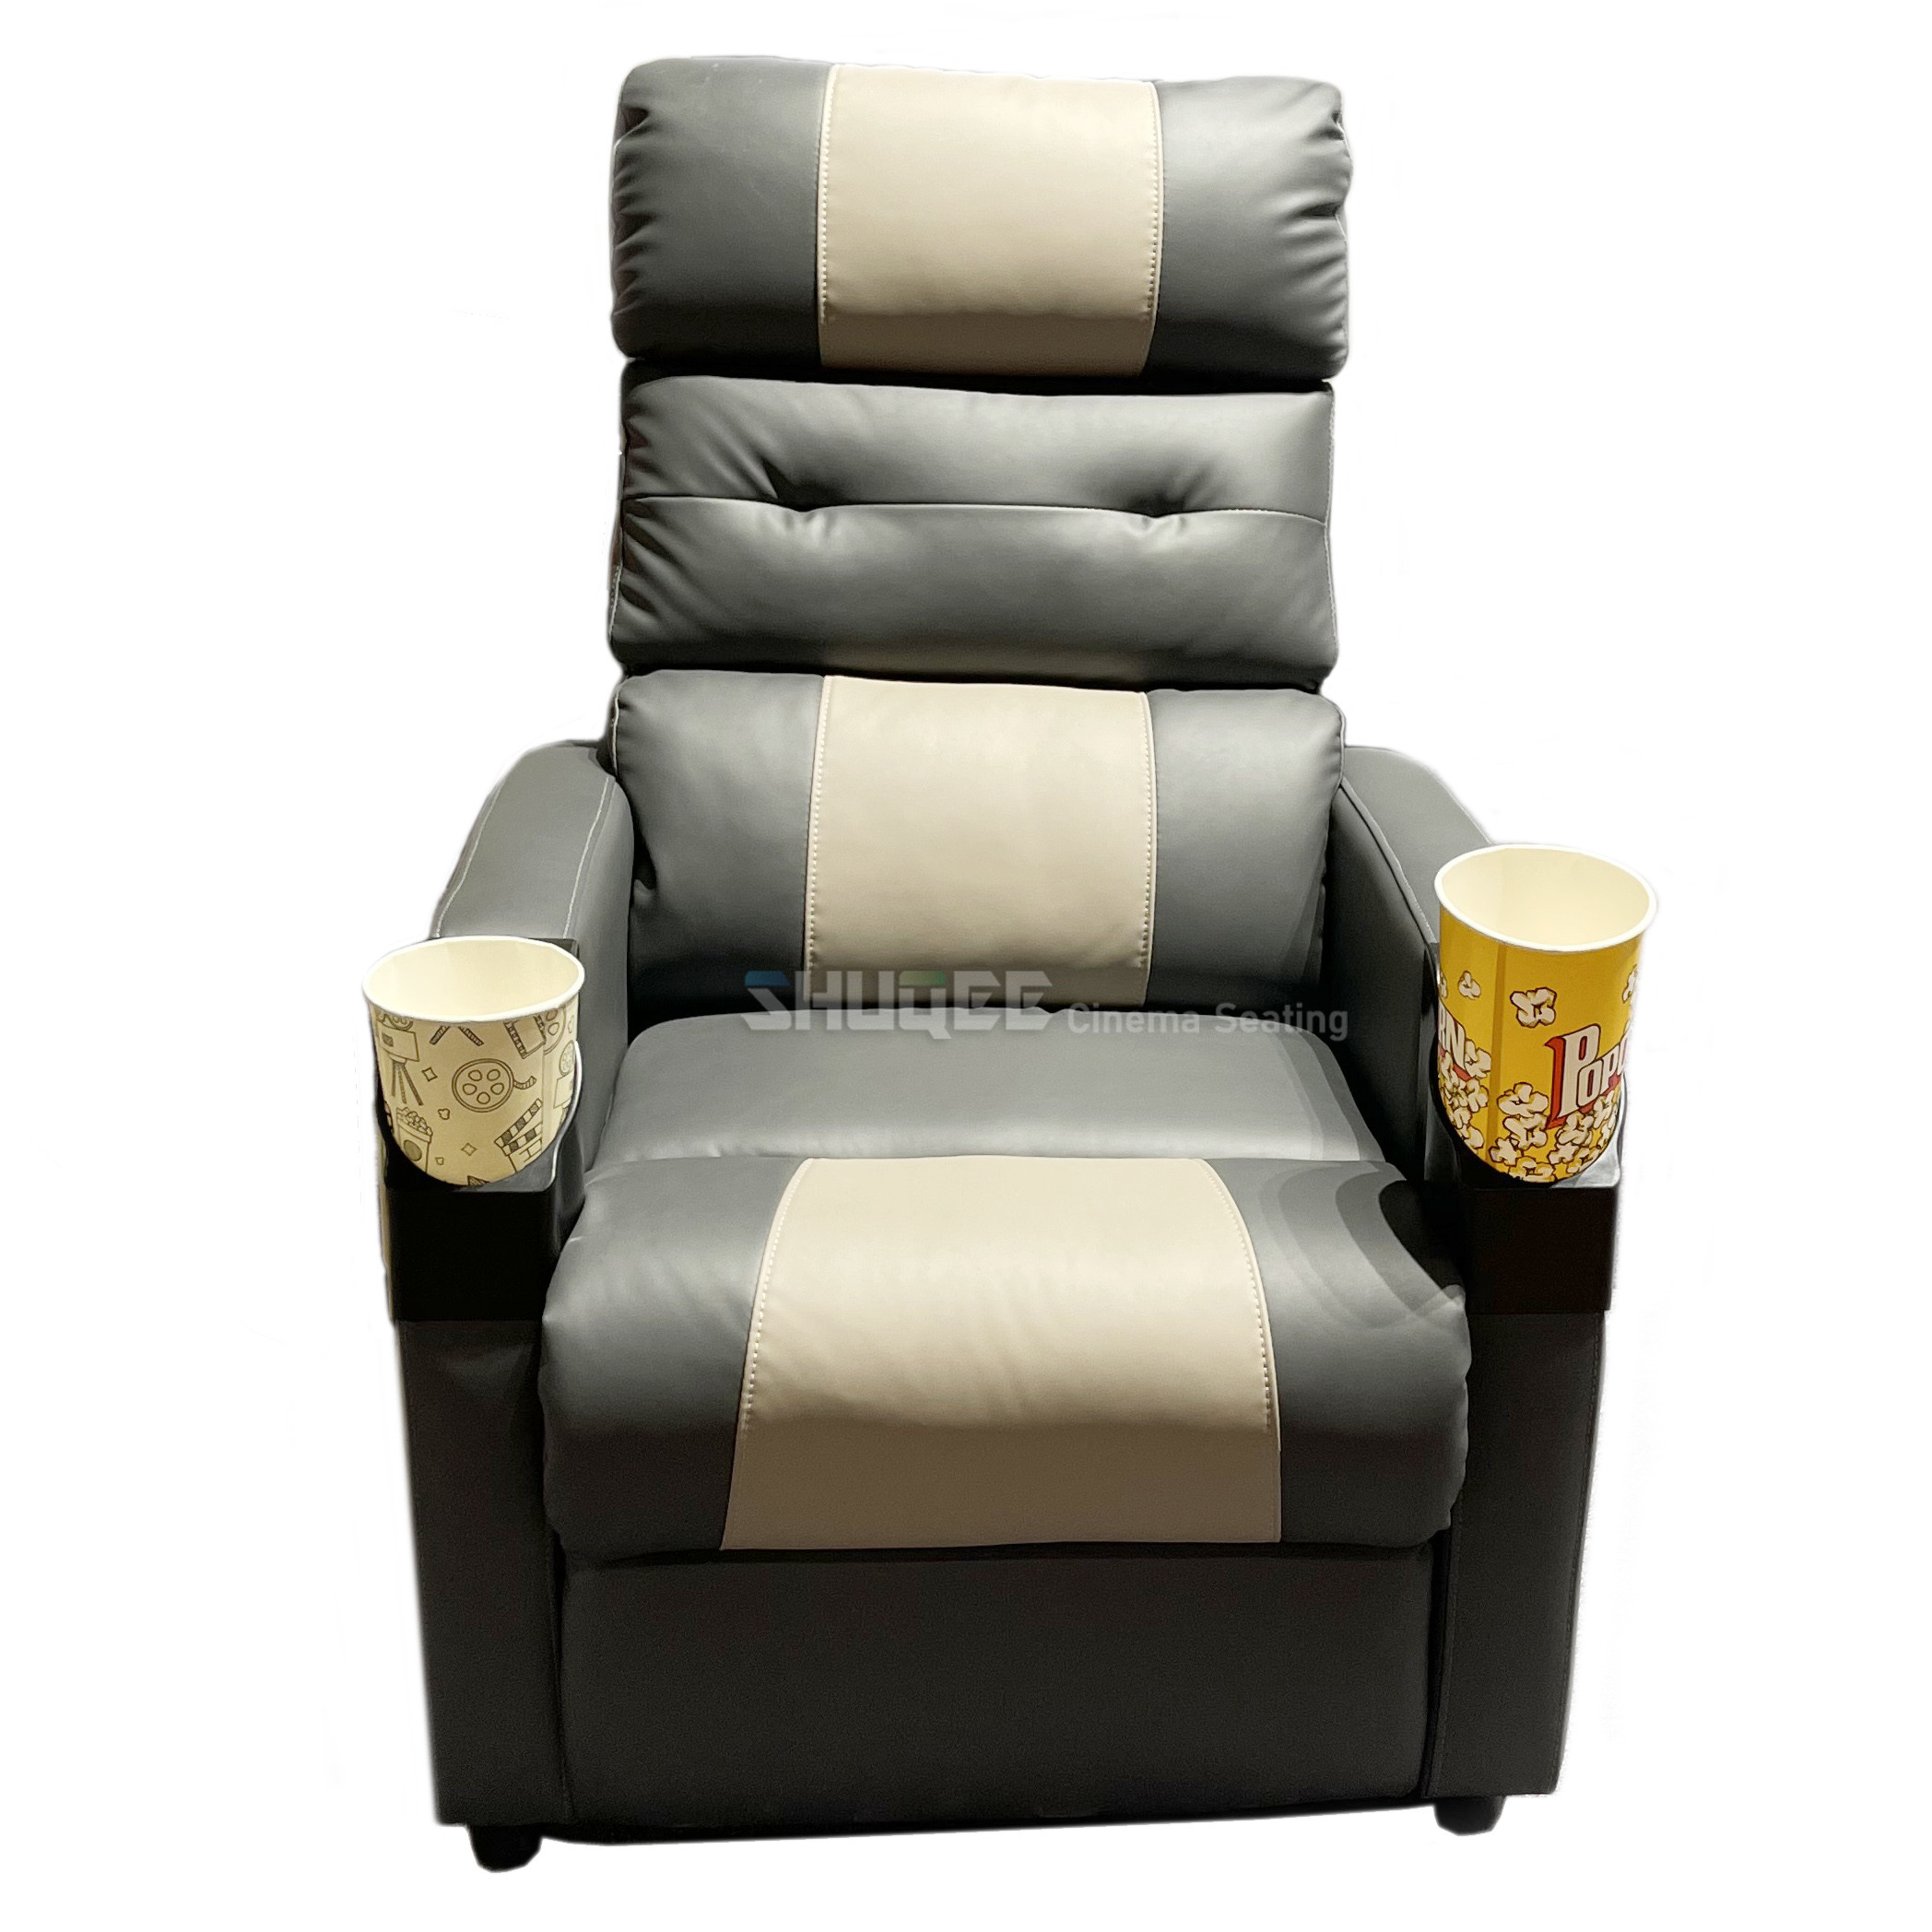  Synthetic Leather Home Theater Seating Furniture Movie Theater Sofa Manufactures